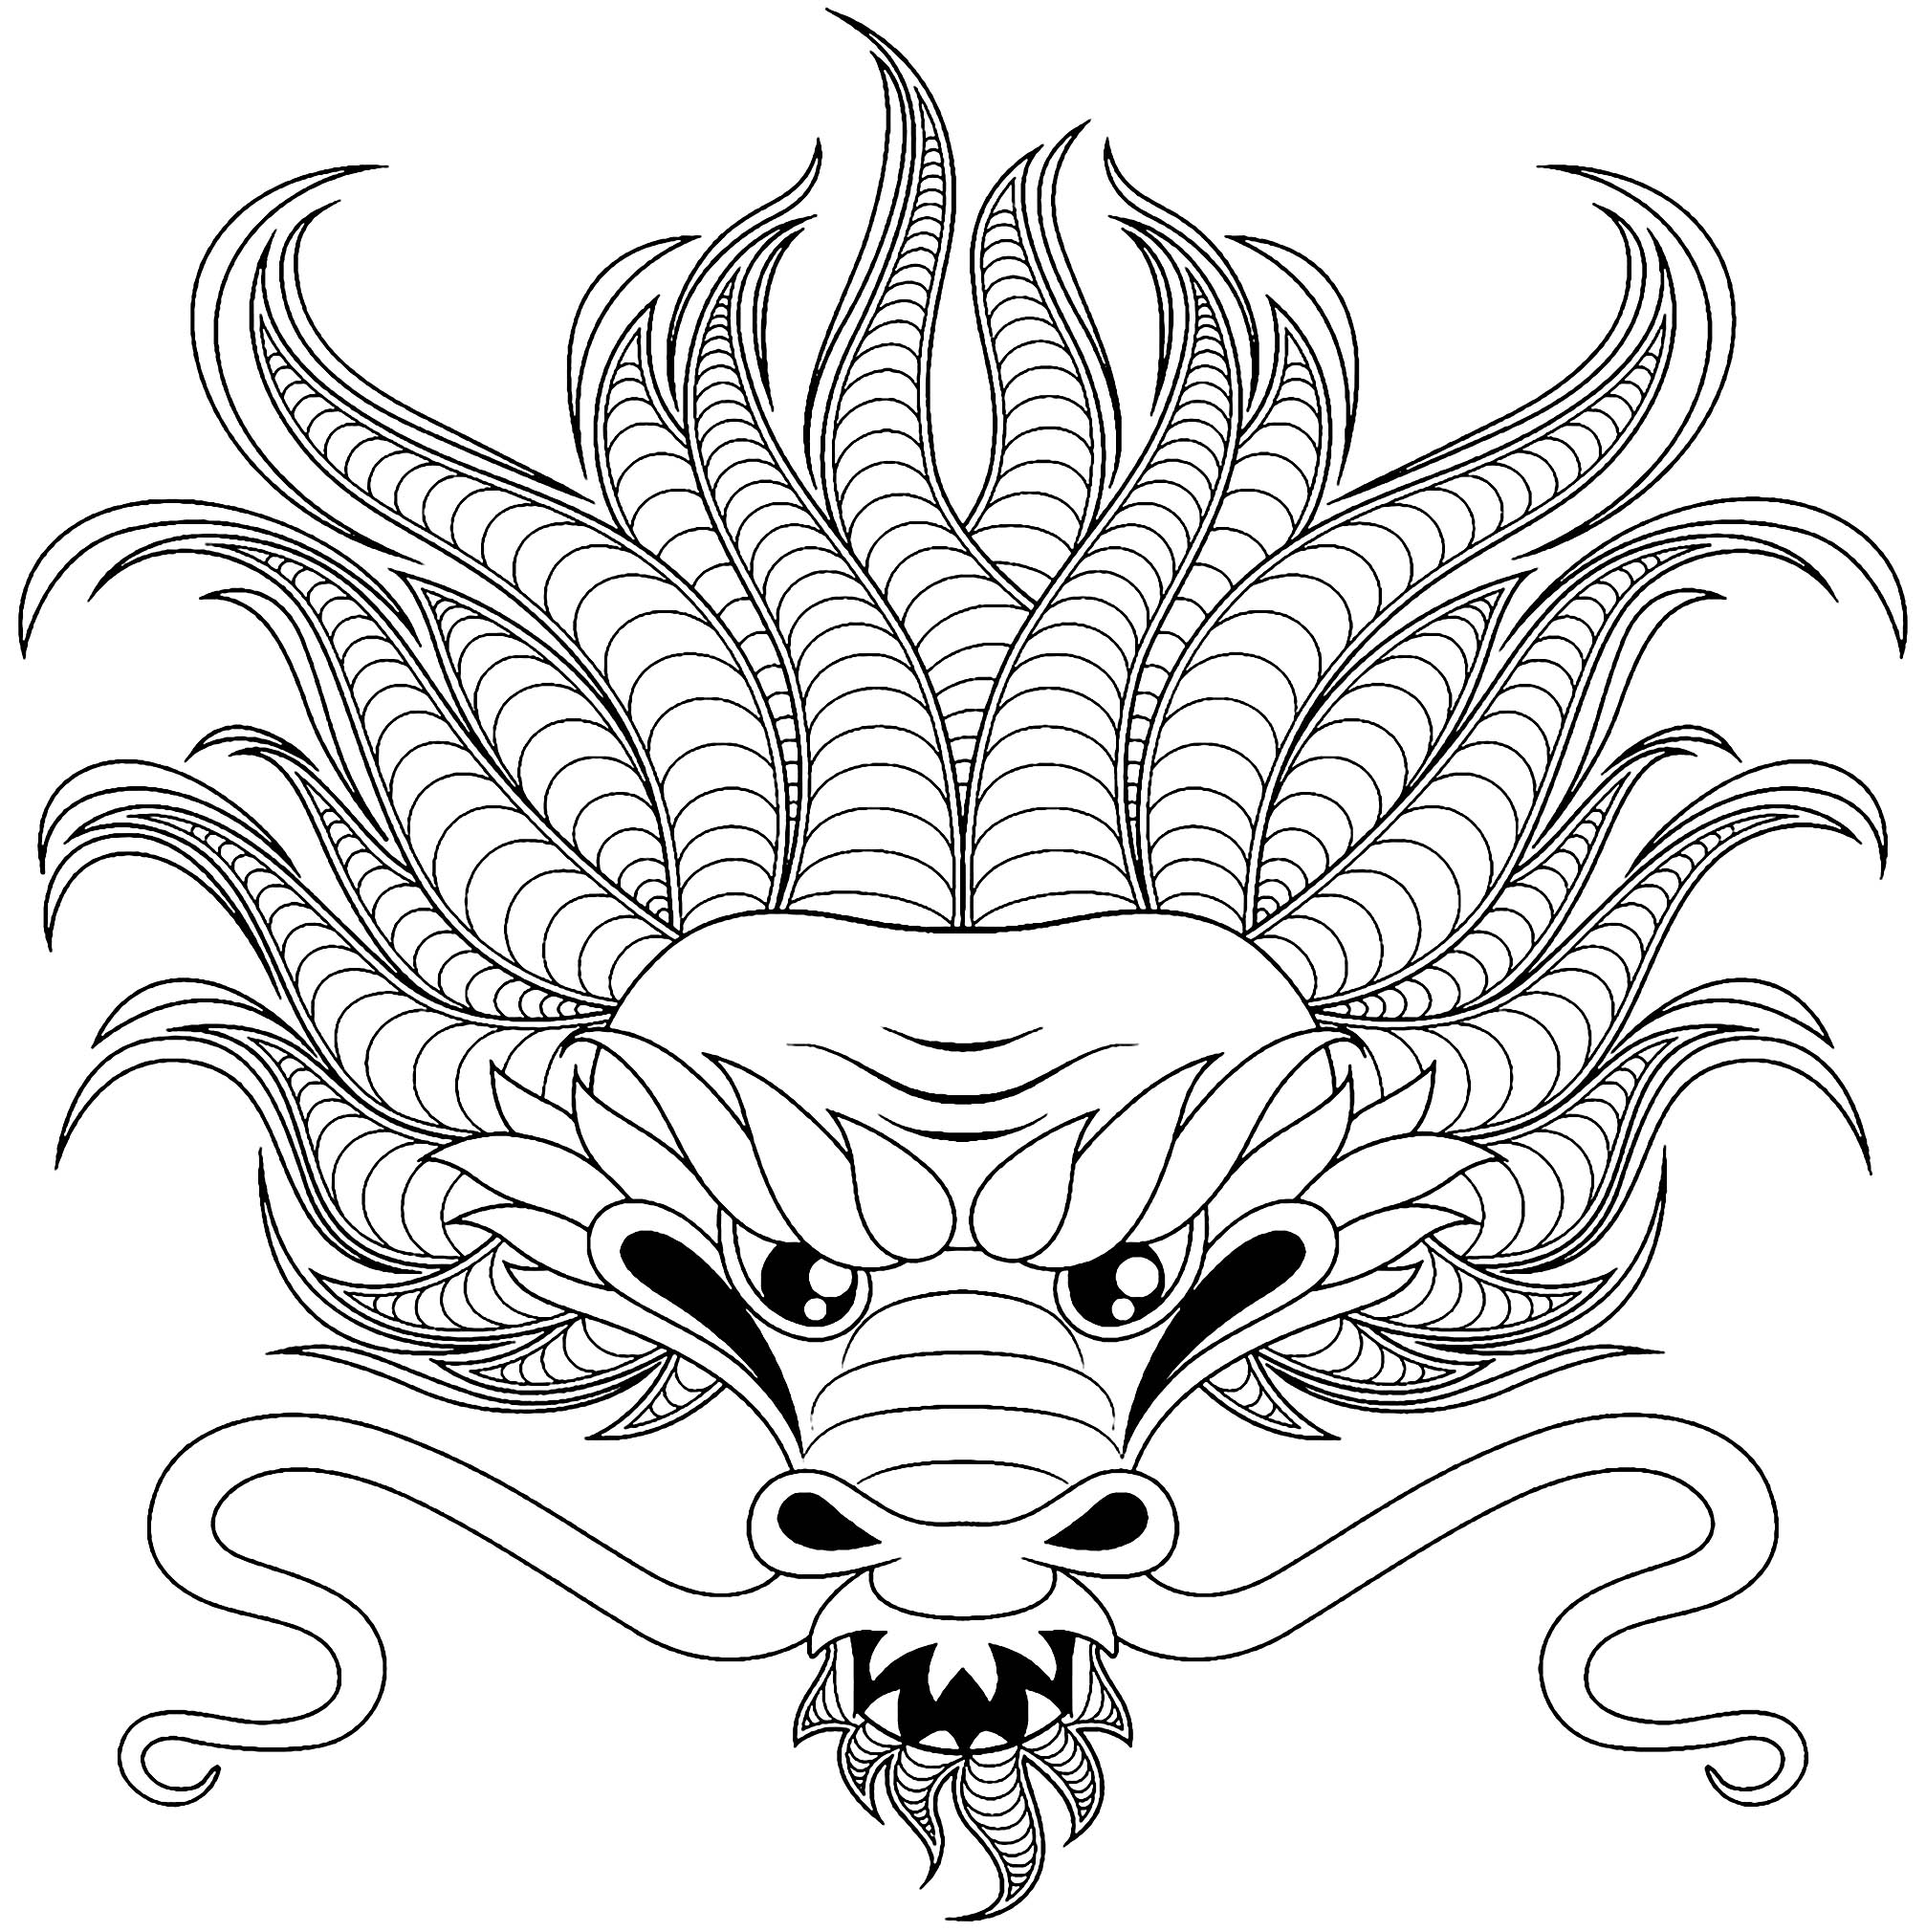 Dragon head Dragons Adult Coloring Pages